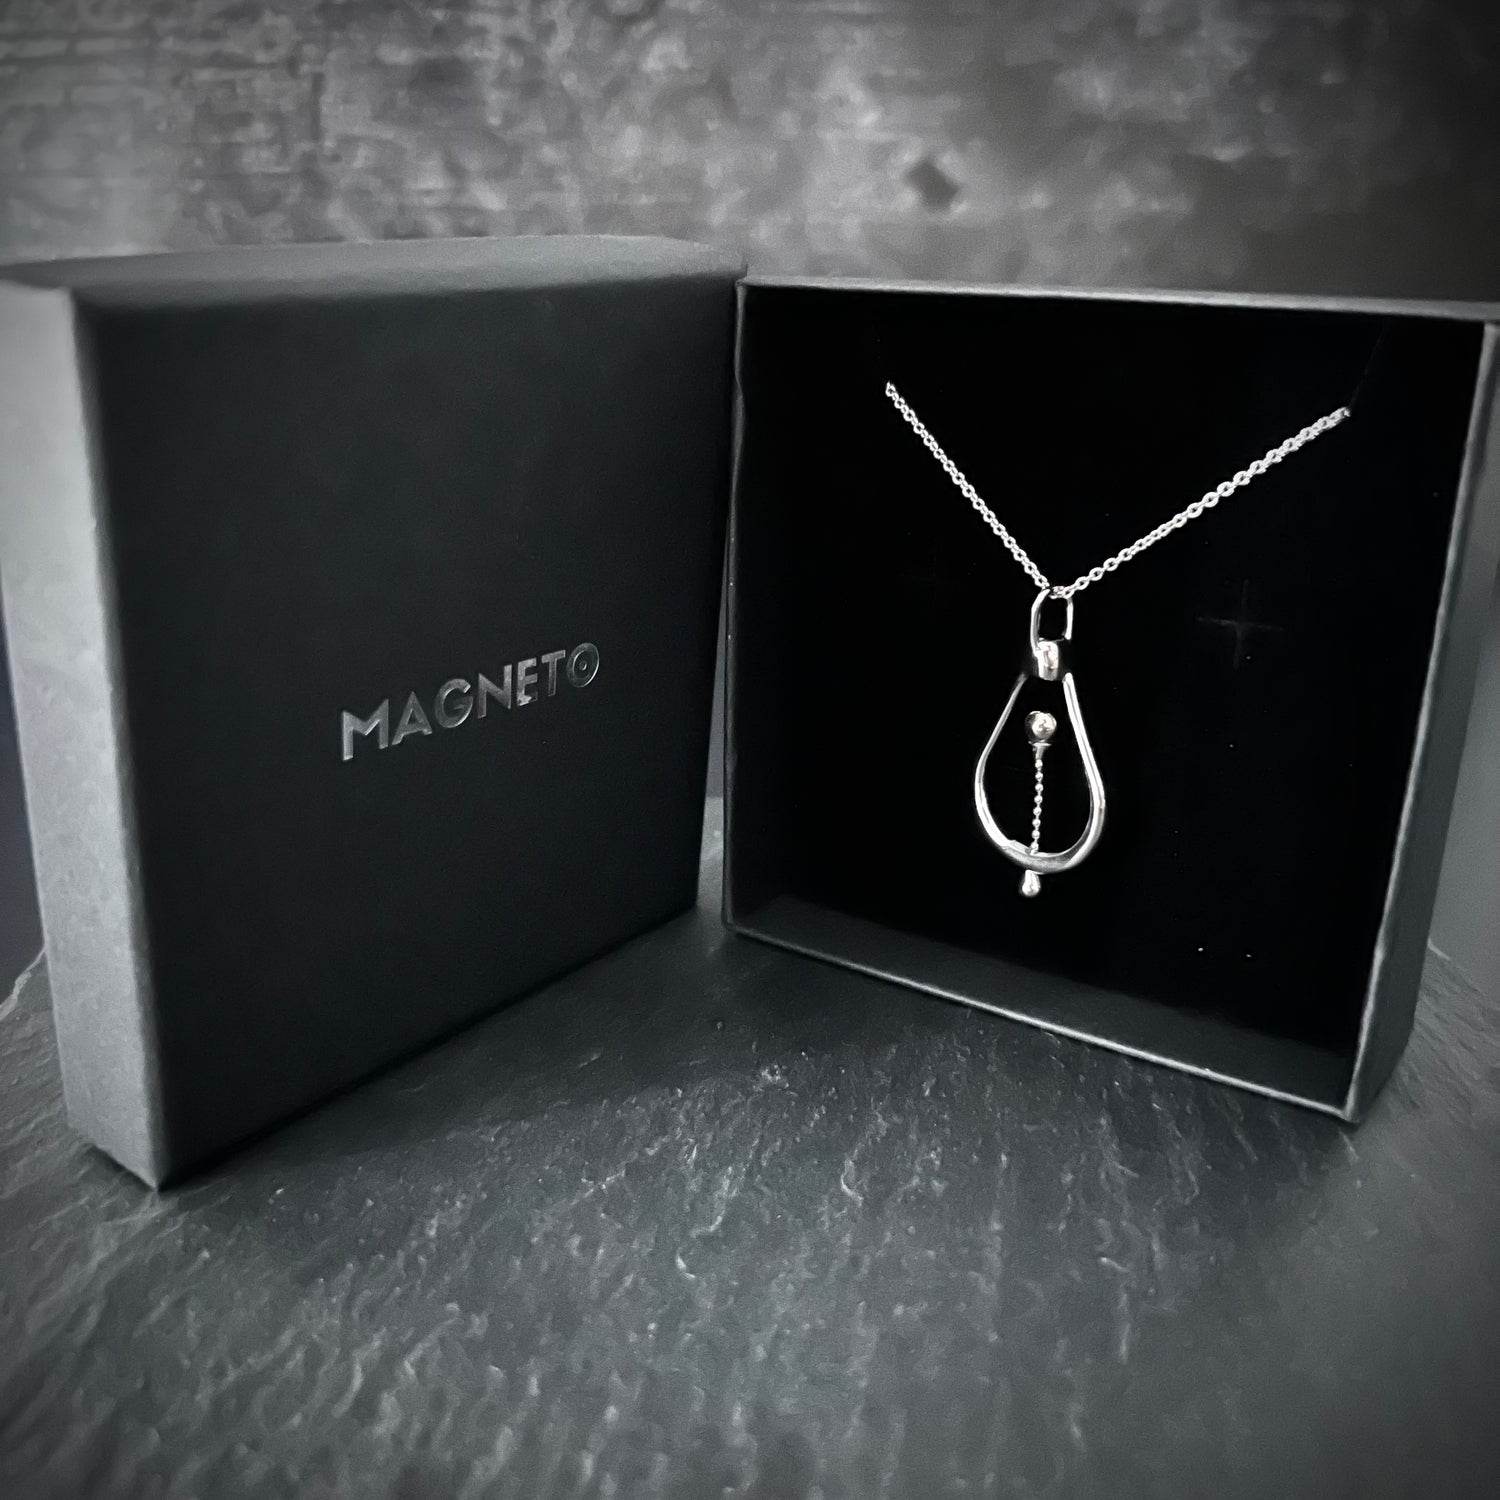 Magneto-Watch-Necklace-Float-Silver-Scope-Of-Delivery